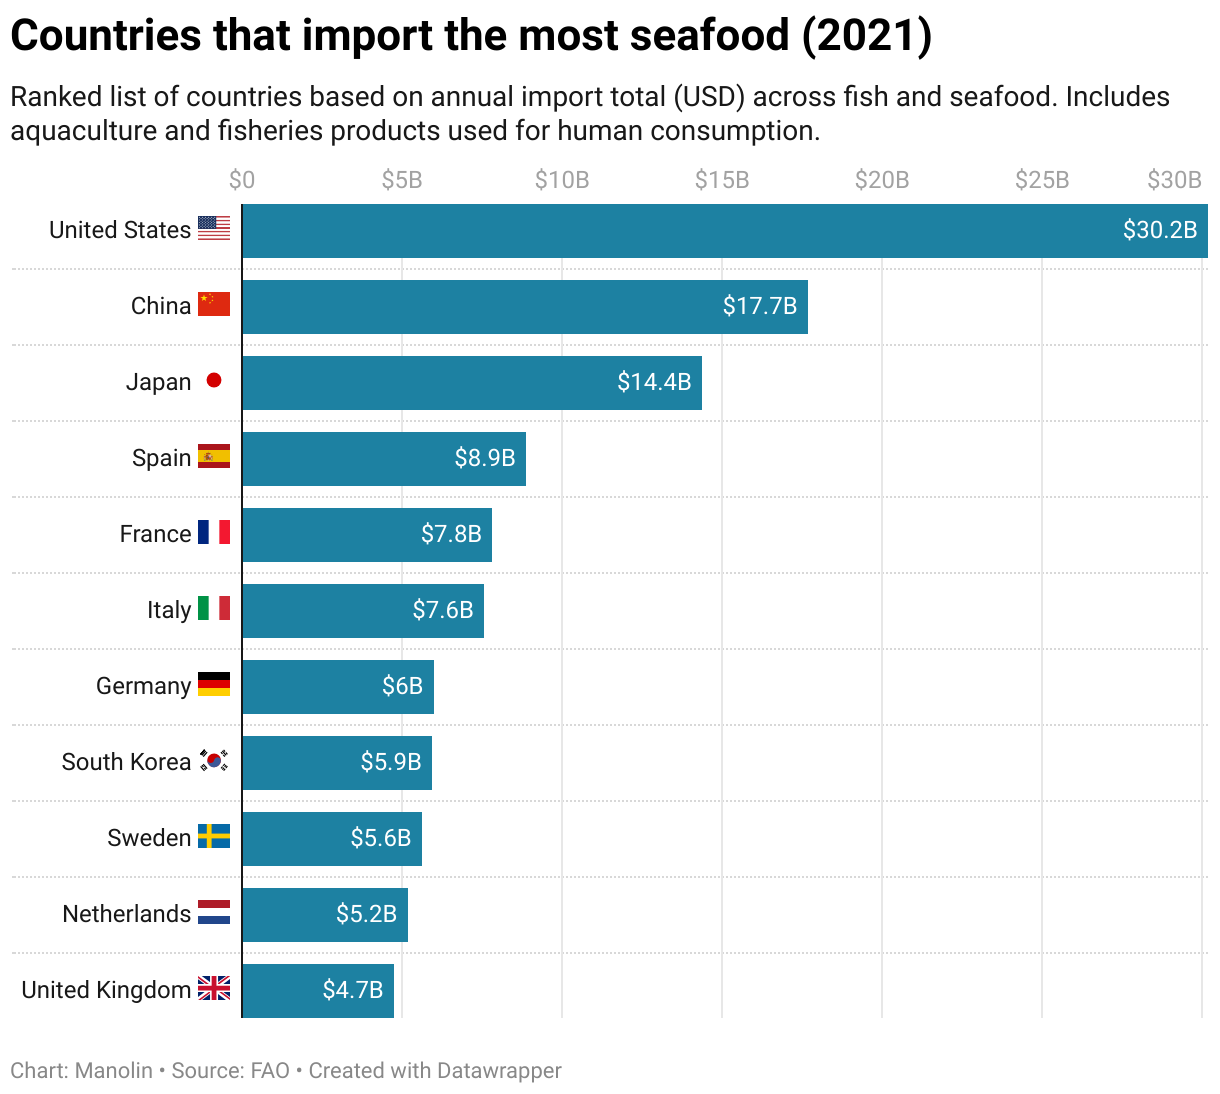 Countries that import the most seafood (2021)